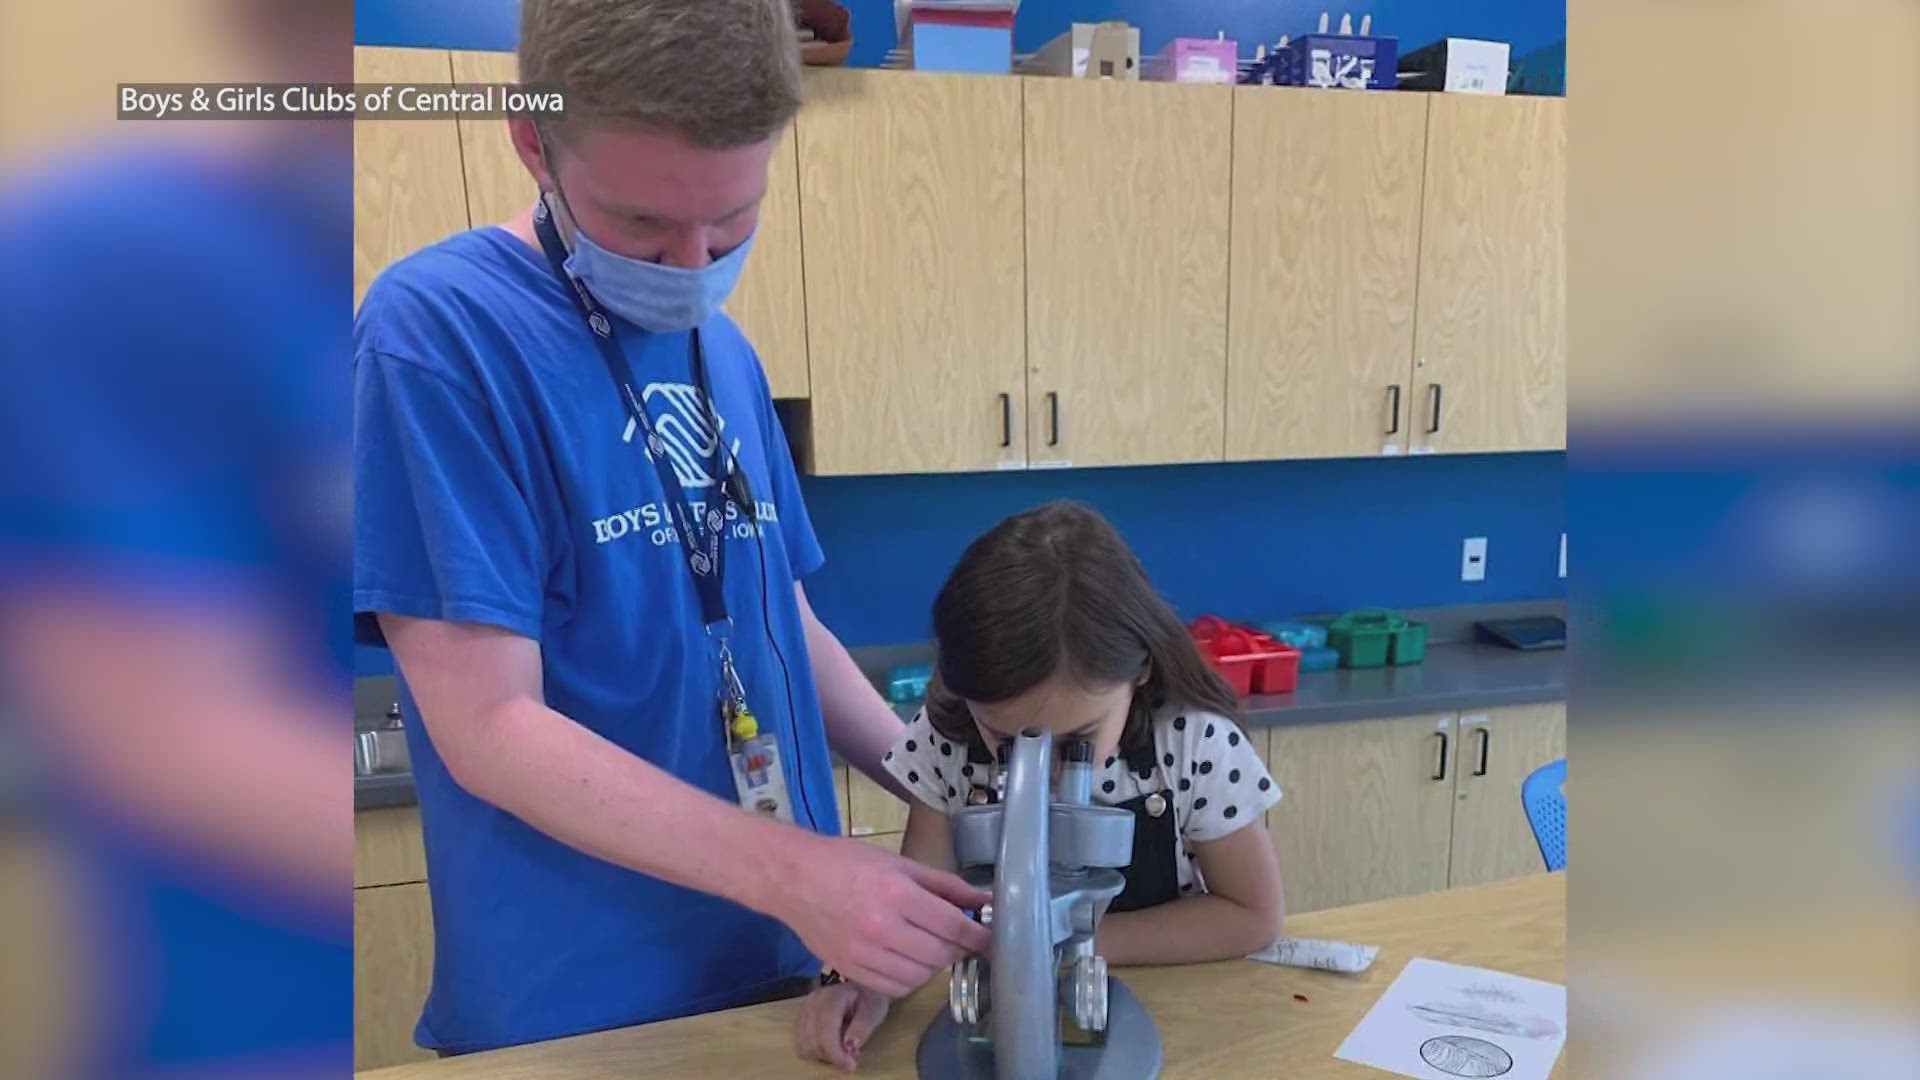 Boys and Girls Clubs of Central Iowa expanded their hours so kids can attend all day and get help with virtual learning in the wake of the coronavirus pandemic.